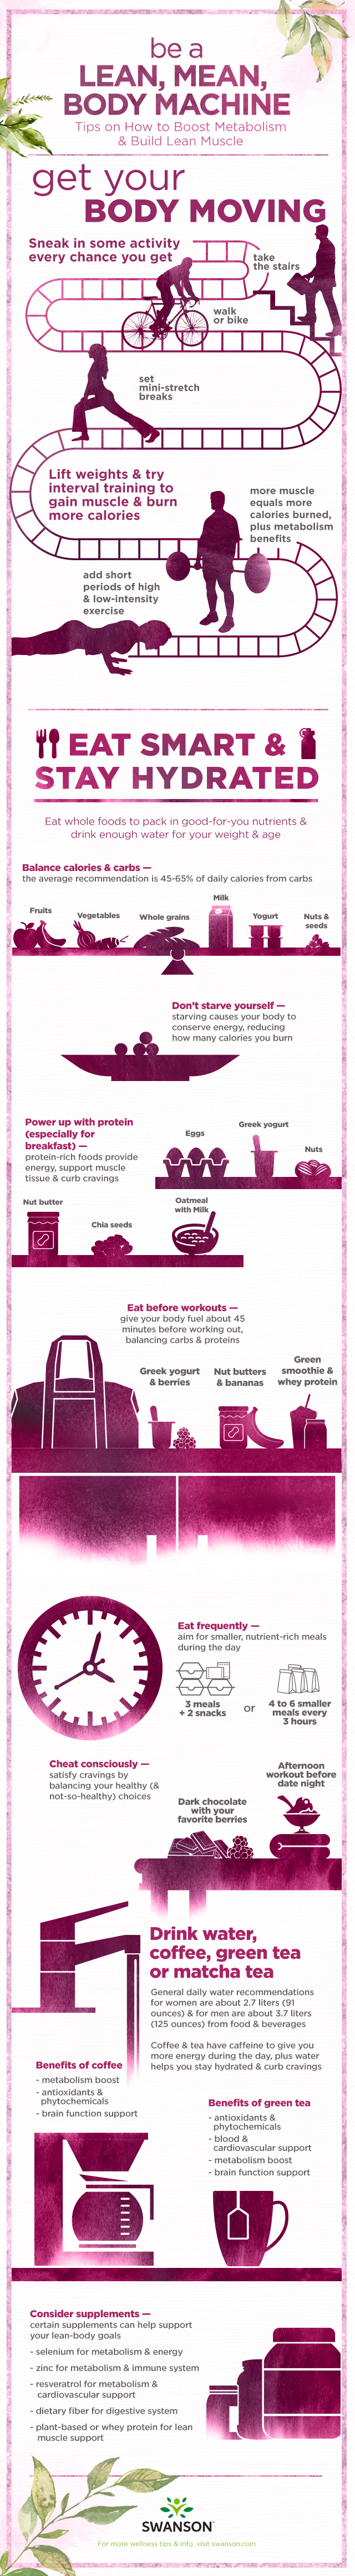 Be a Lean, Mean Body Machine - Tips to Boost Metabolism & Build Lean Muscle Infographic Swanson Health